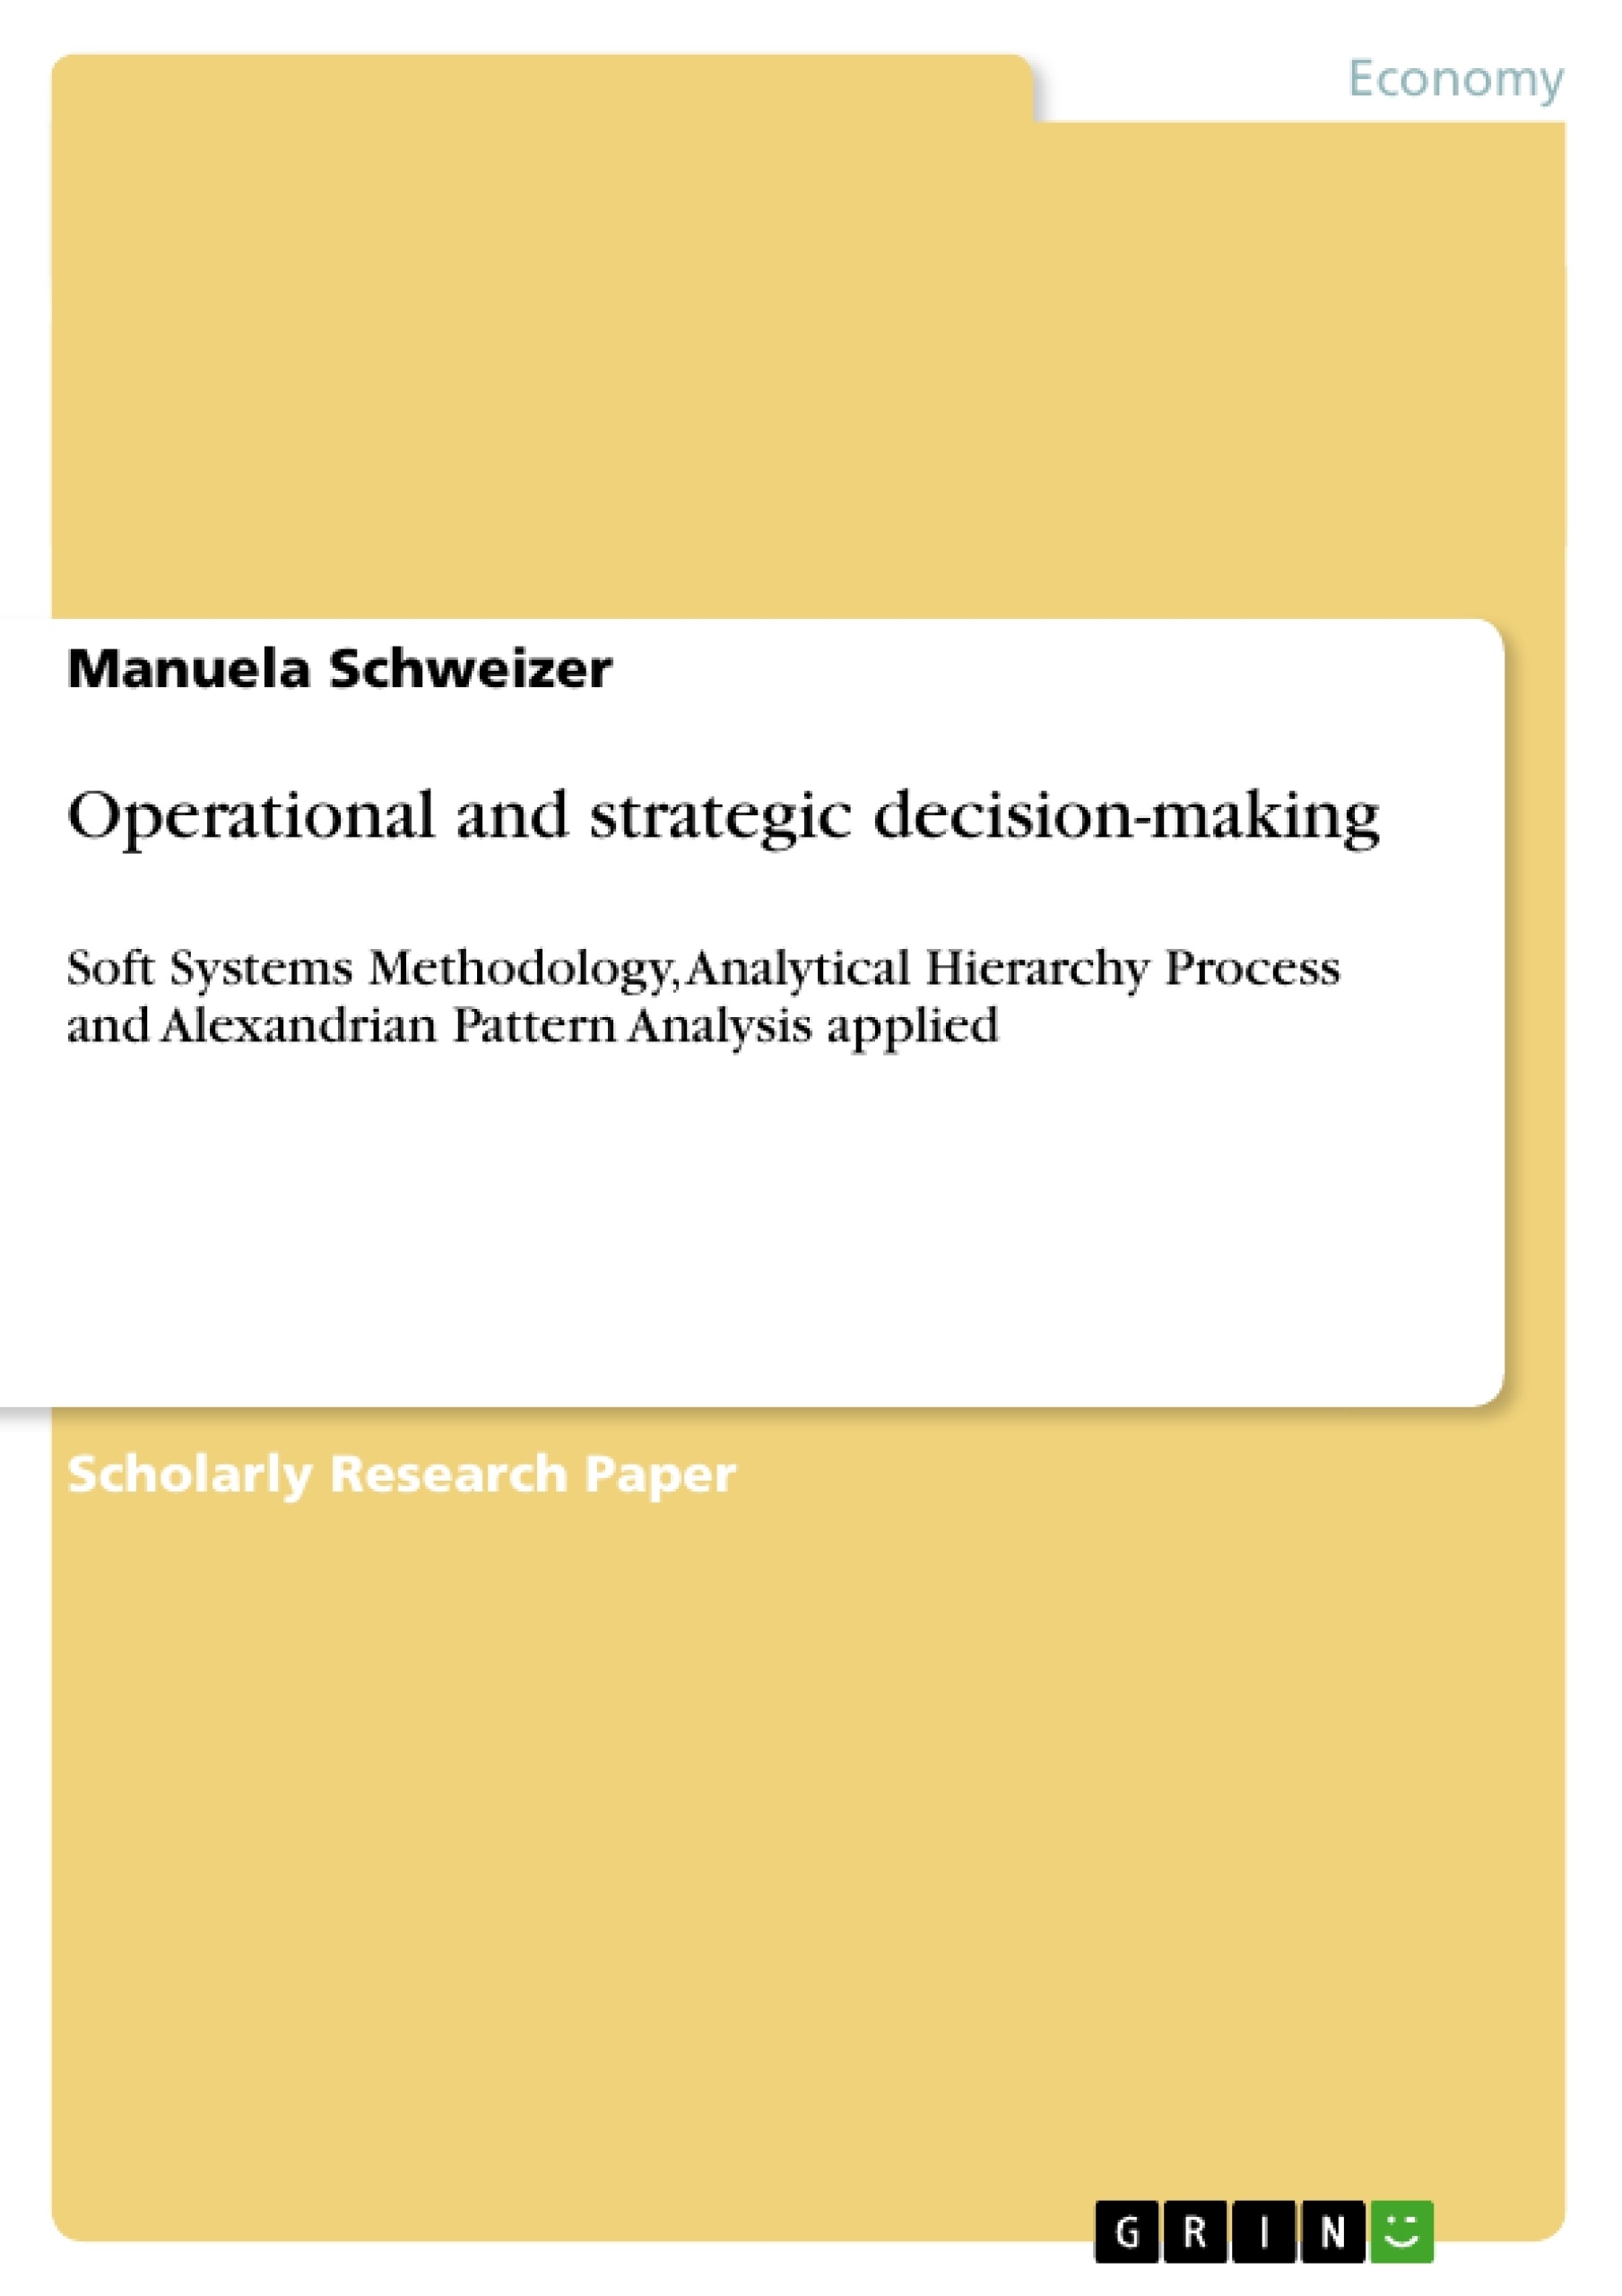 Title: Operational and strategic decision-making